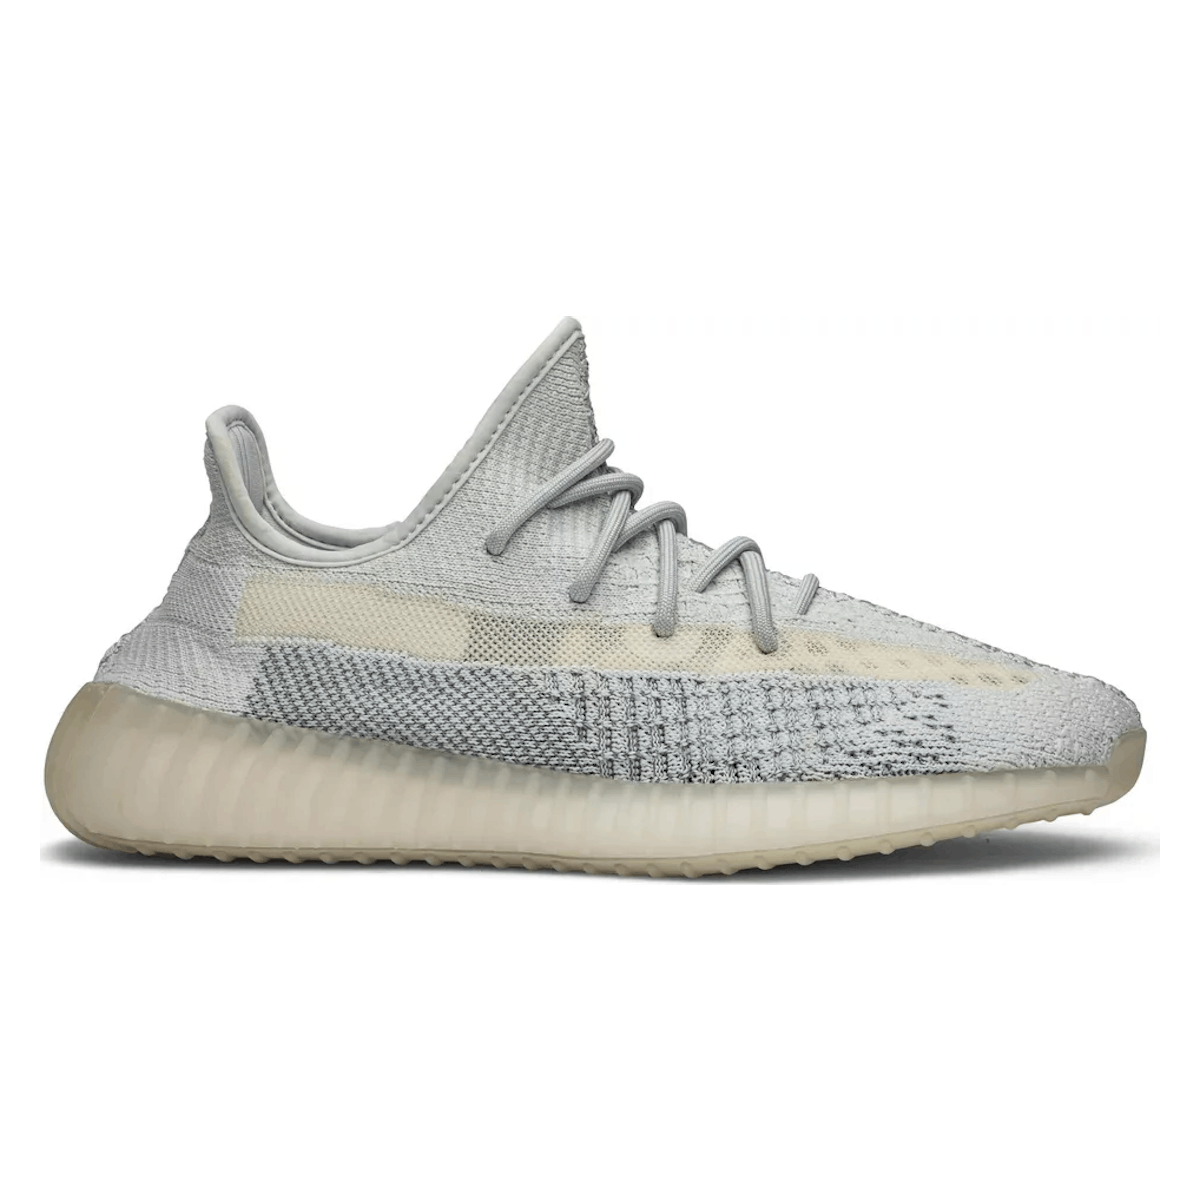 Adidas Yeezy Boost 350 V2 "Cloud White Reflective"